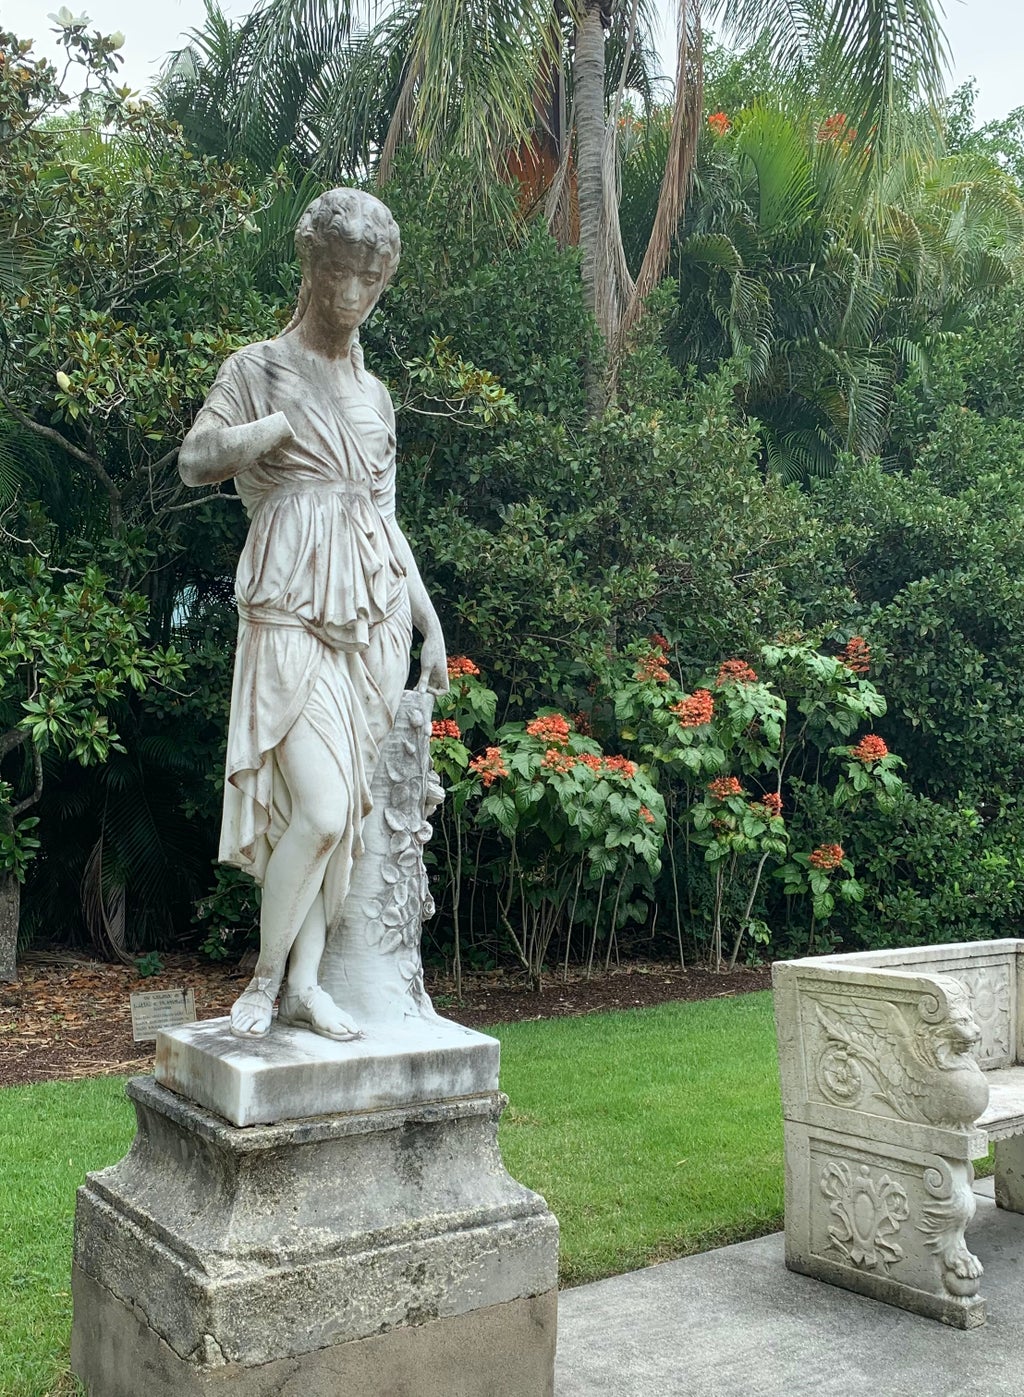 A stone statue of a woman in the Secret Garden at the Ringling Museum of Art in Sarasota, Florida